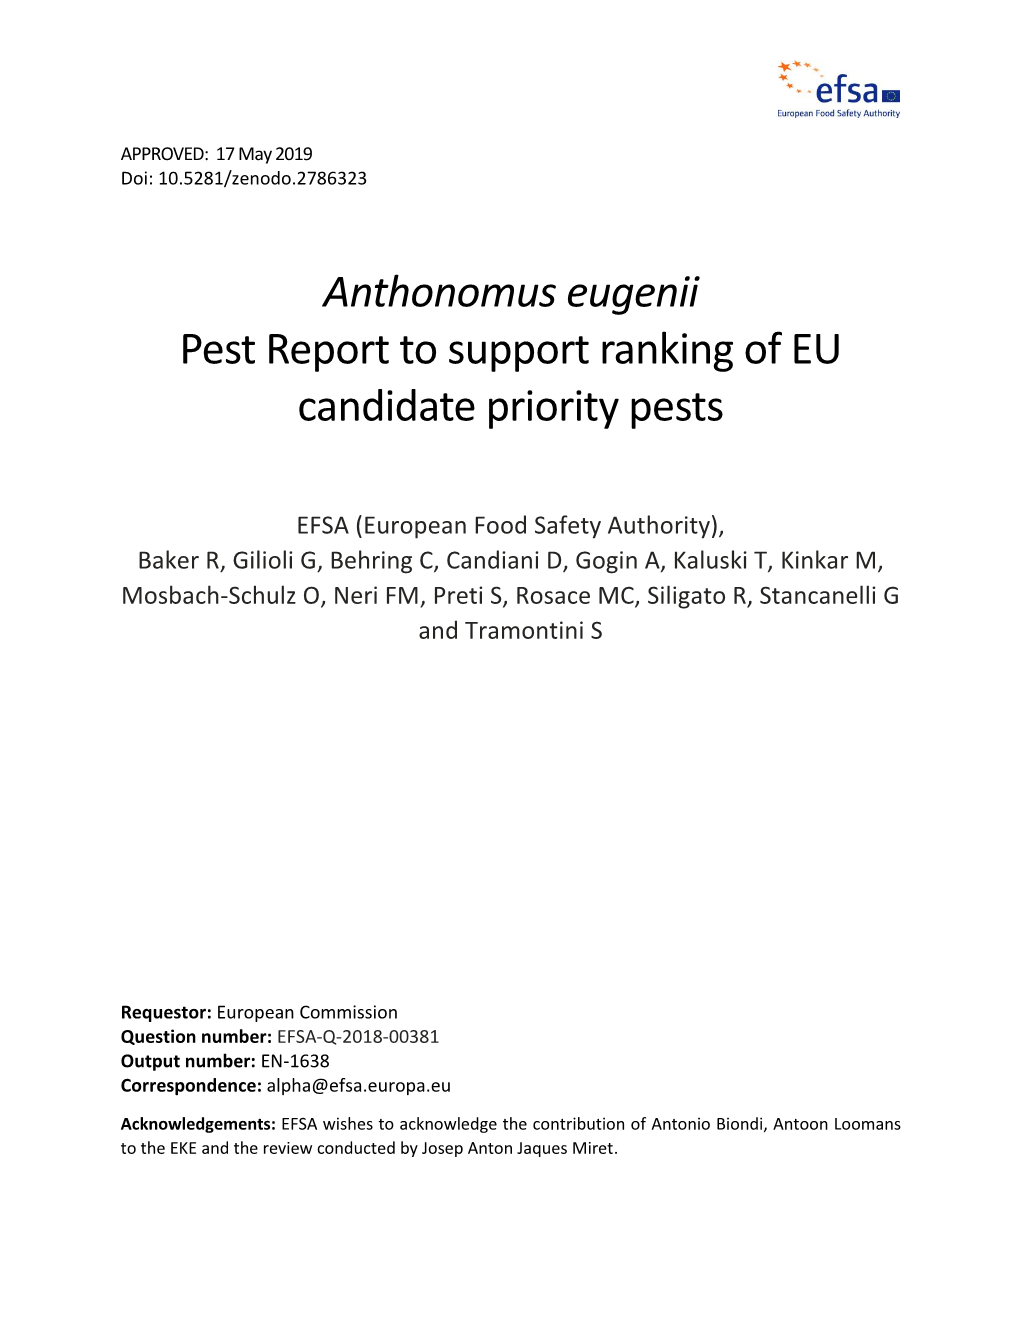 Anthonomus Eugenii Pest Report to Support Ranking of EU Candidate Priority Pests